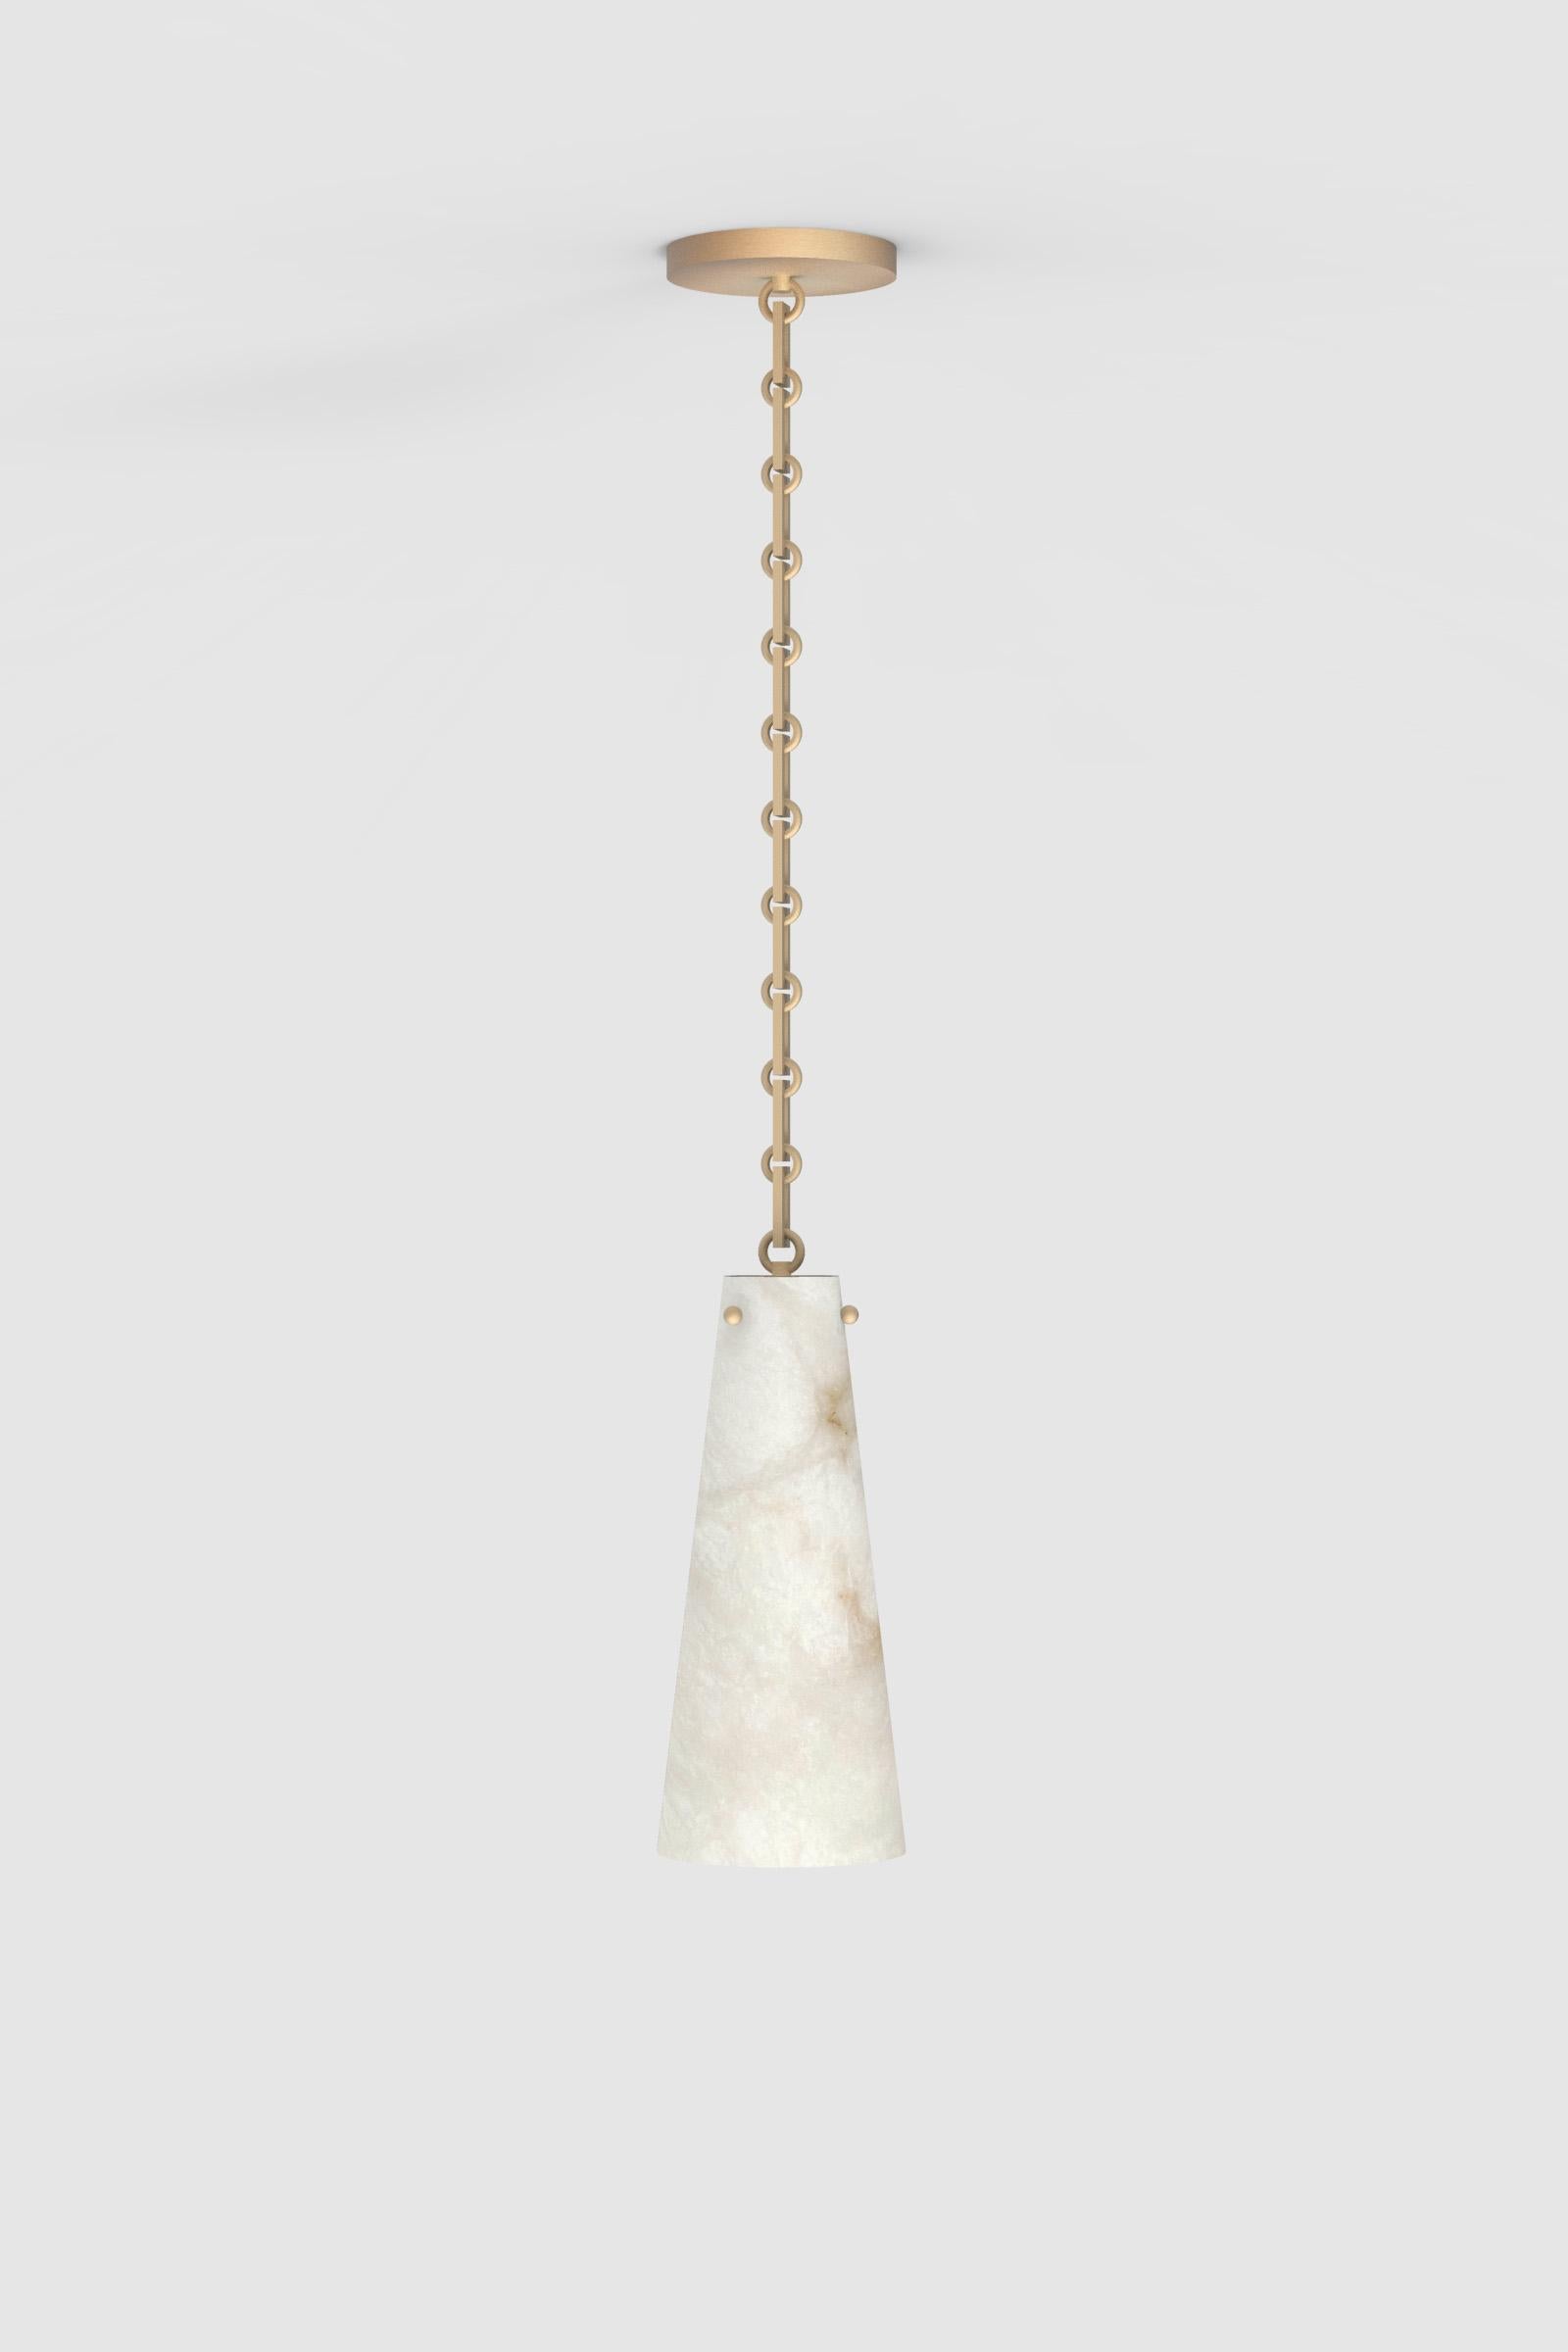 Orphan Work 202A Pendant BB, 2021
Shown in alabaster with blackened brass
Available in brushed brass and blackened brass
Measures: 15” H x 6 1/2” W 
height and width to order*
canopy 6